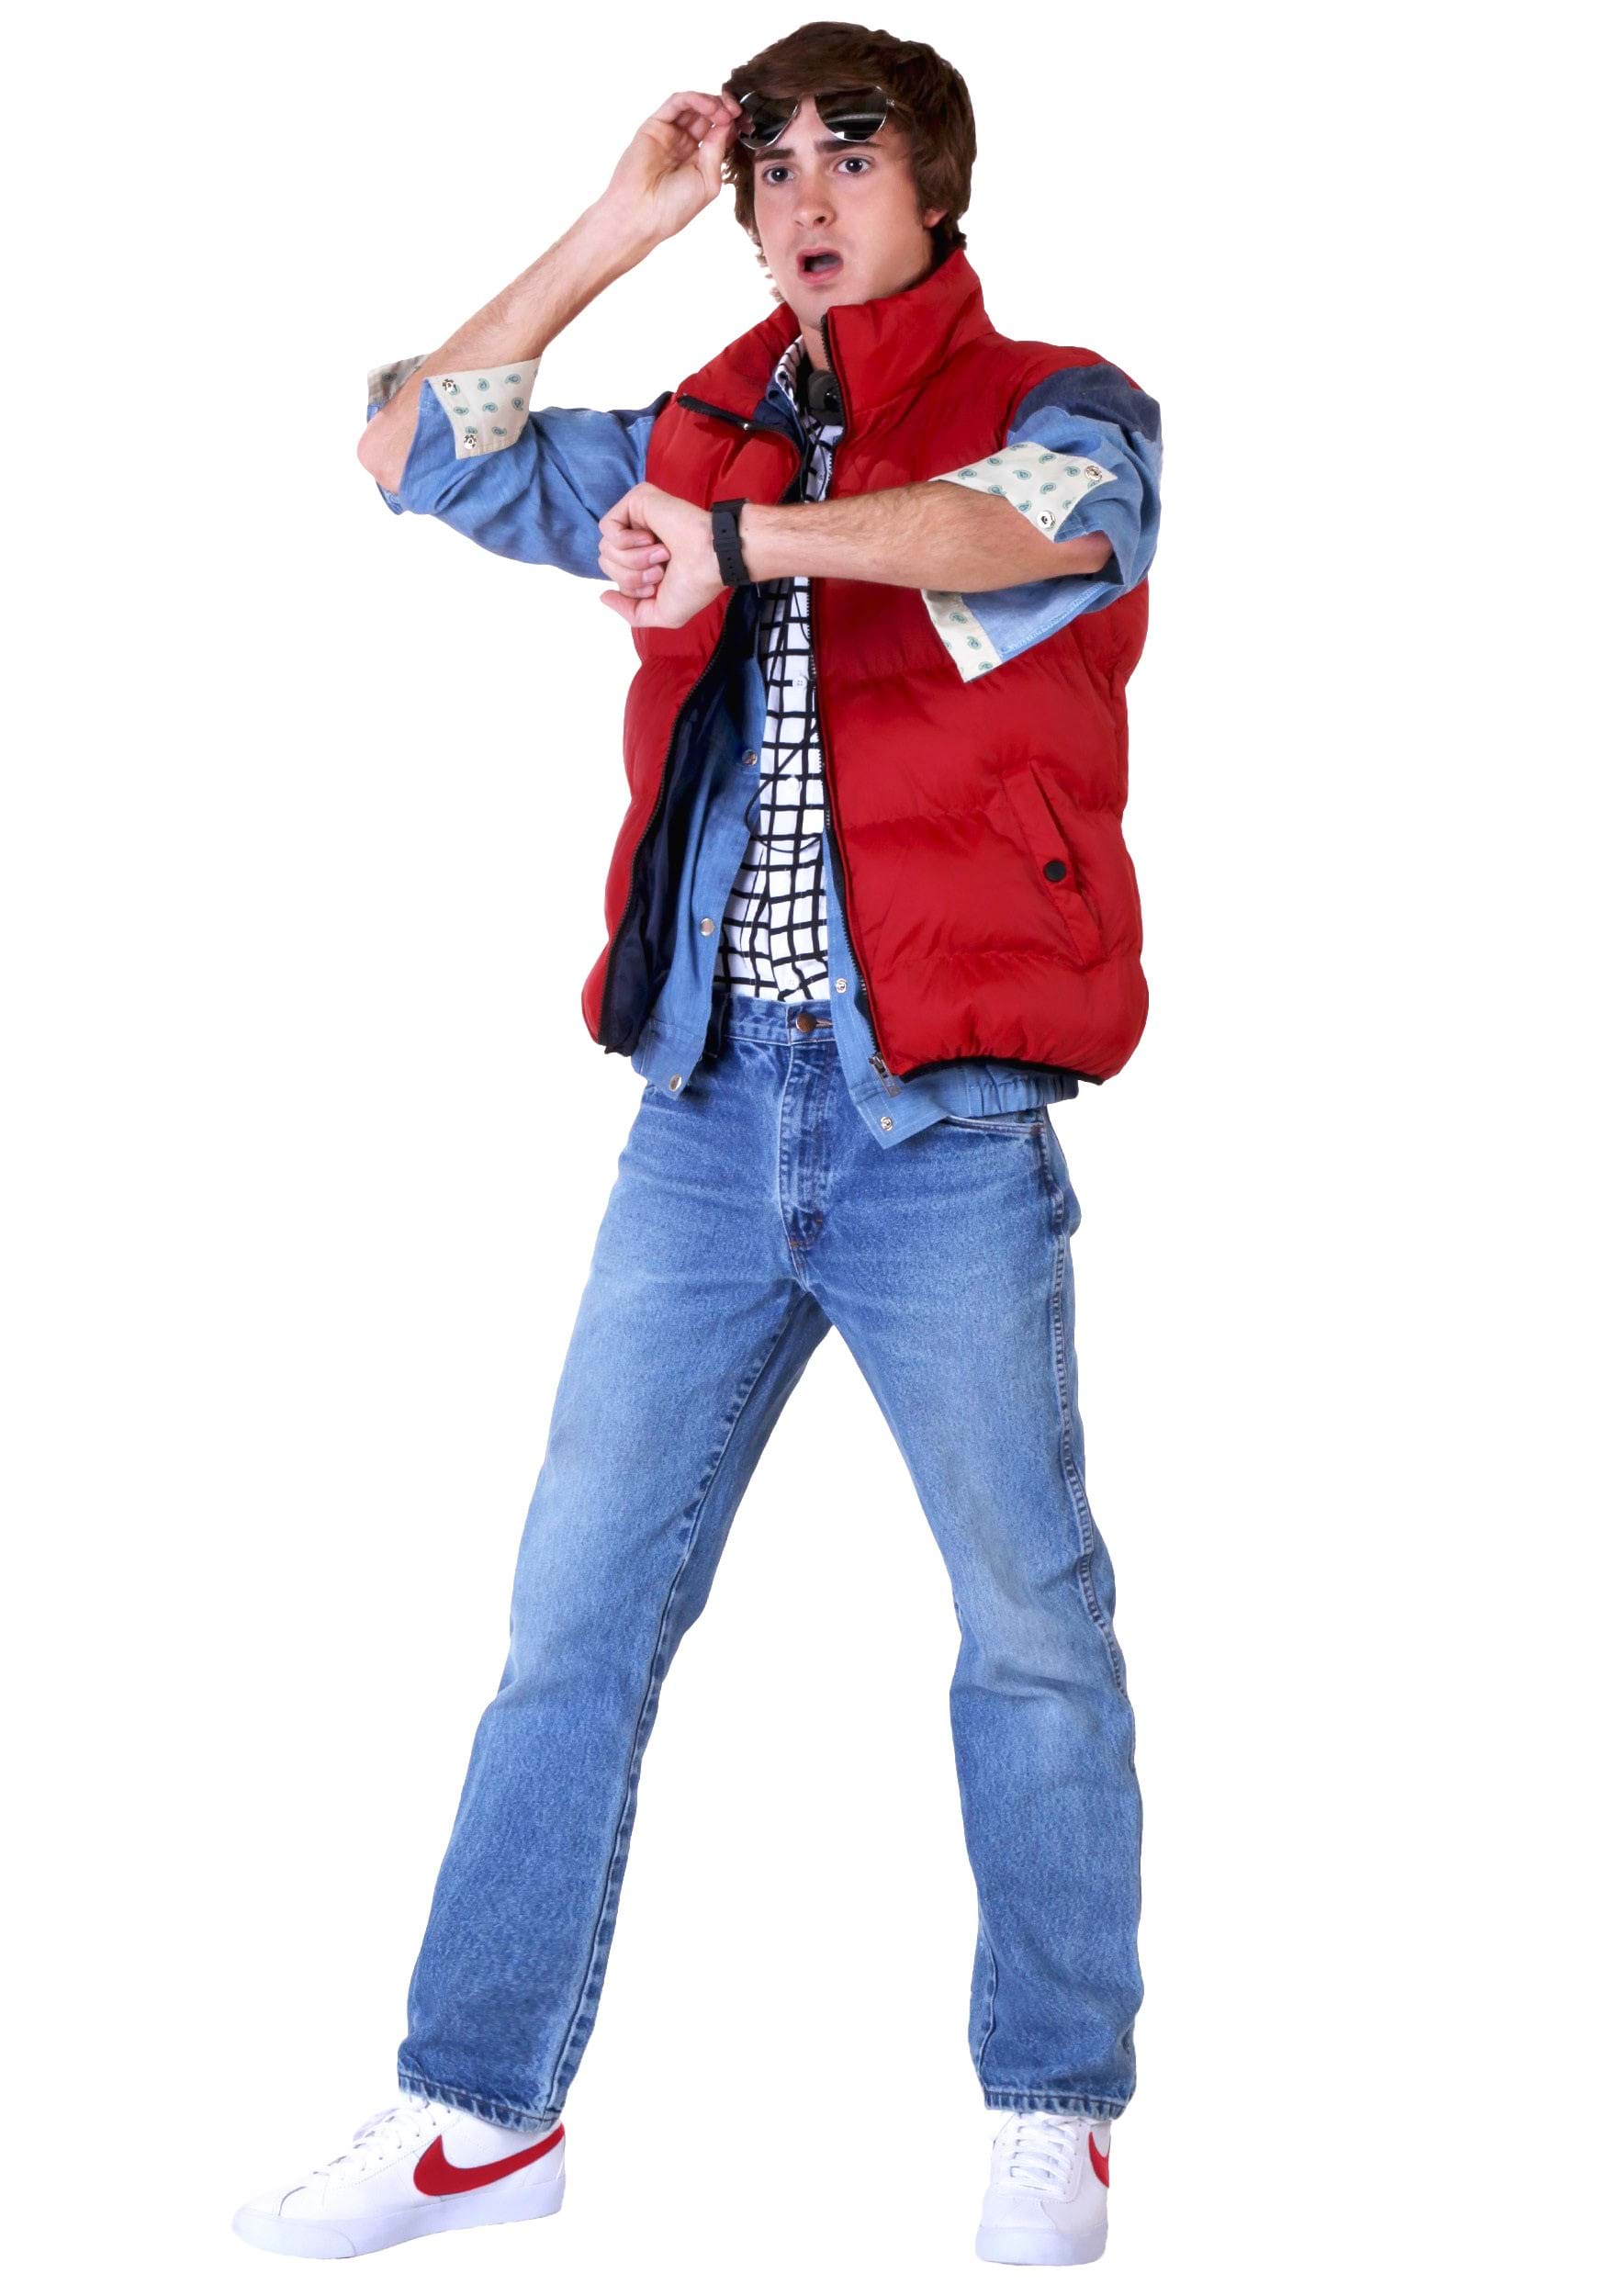 Photos - Fancy Dress FUN Costumes Marty McFly Back to the Future Costume | 80s Movies Costume B